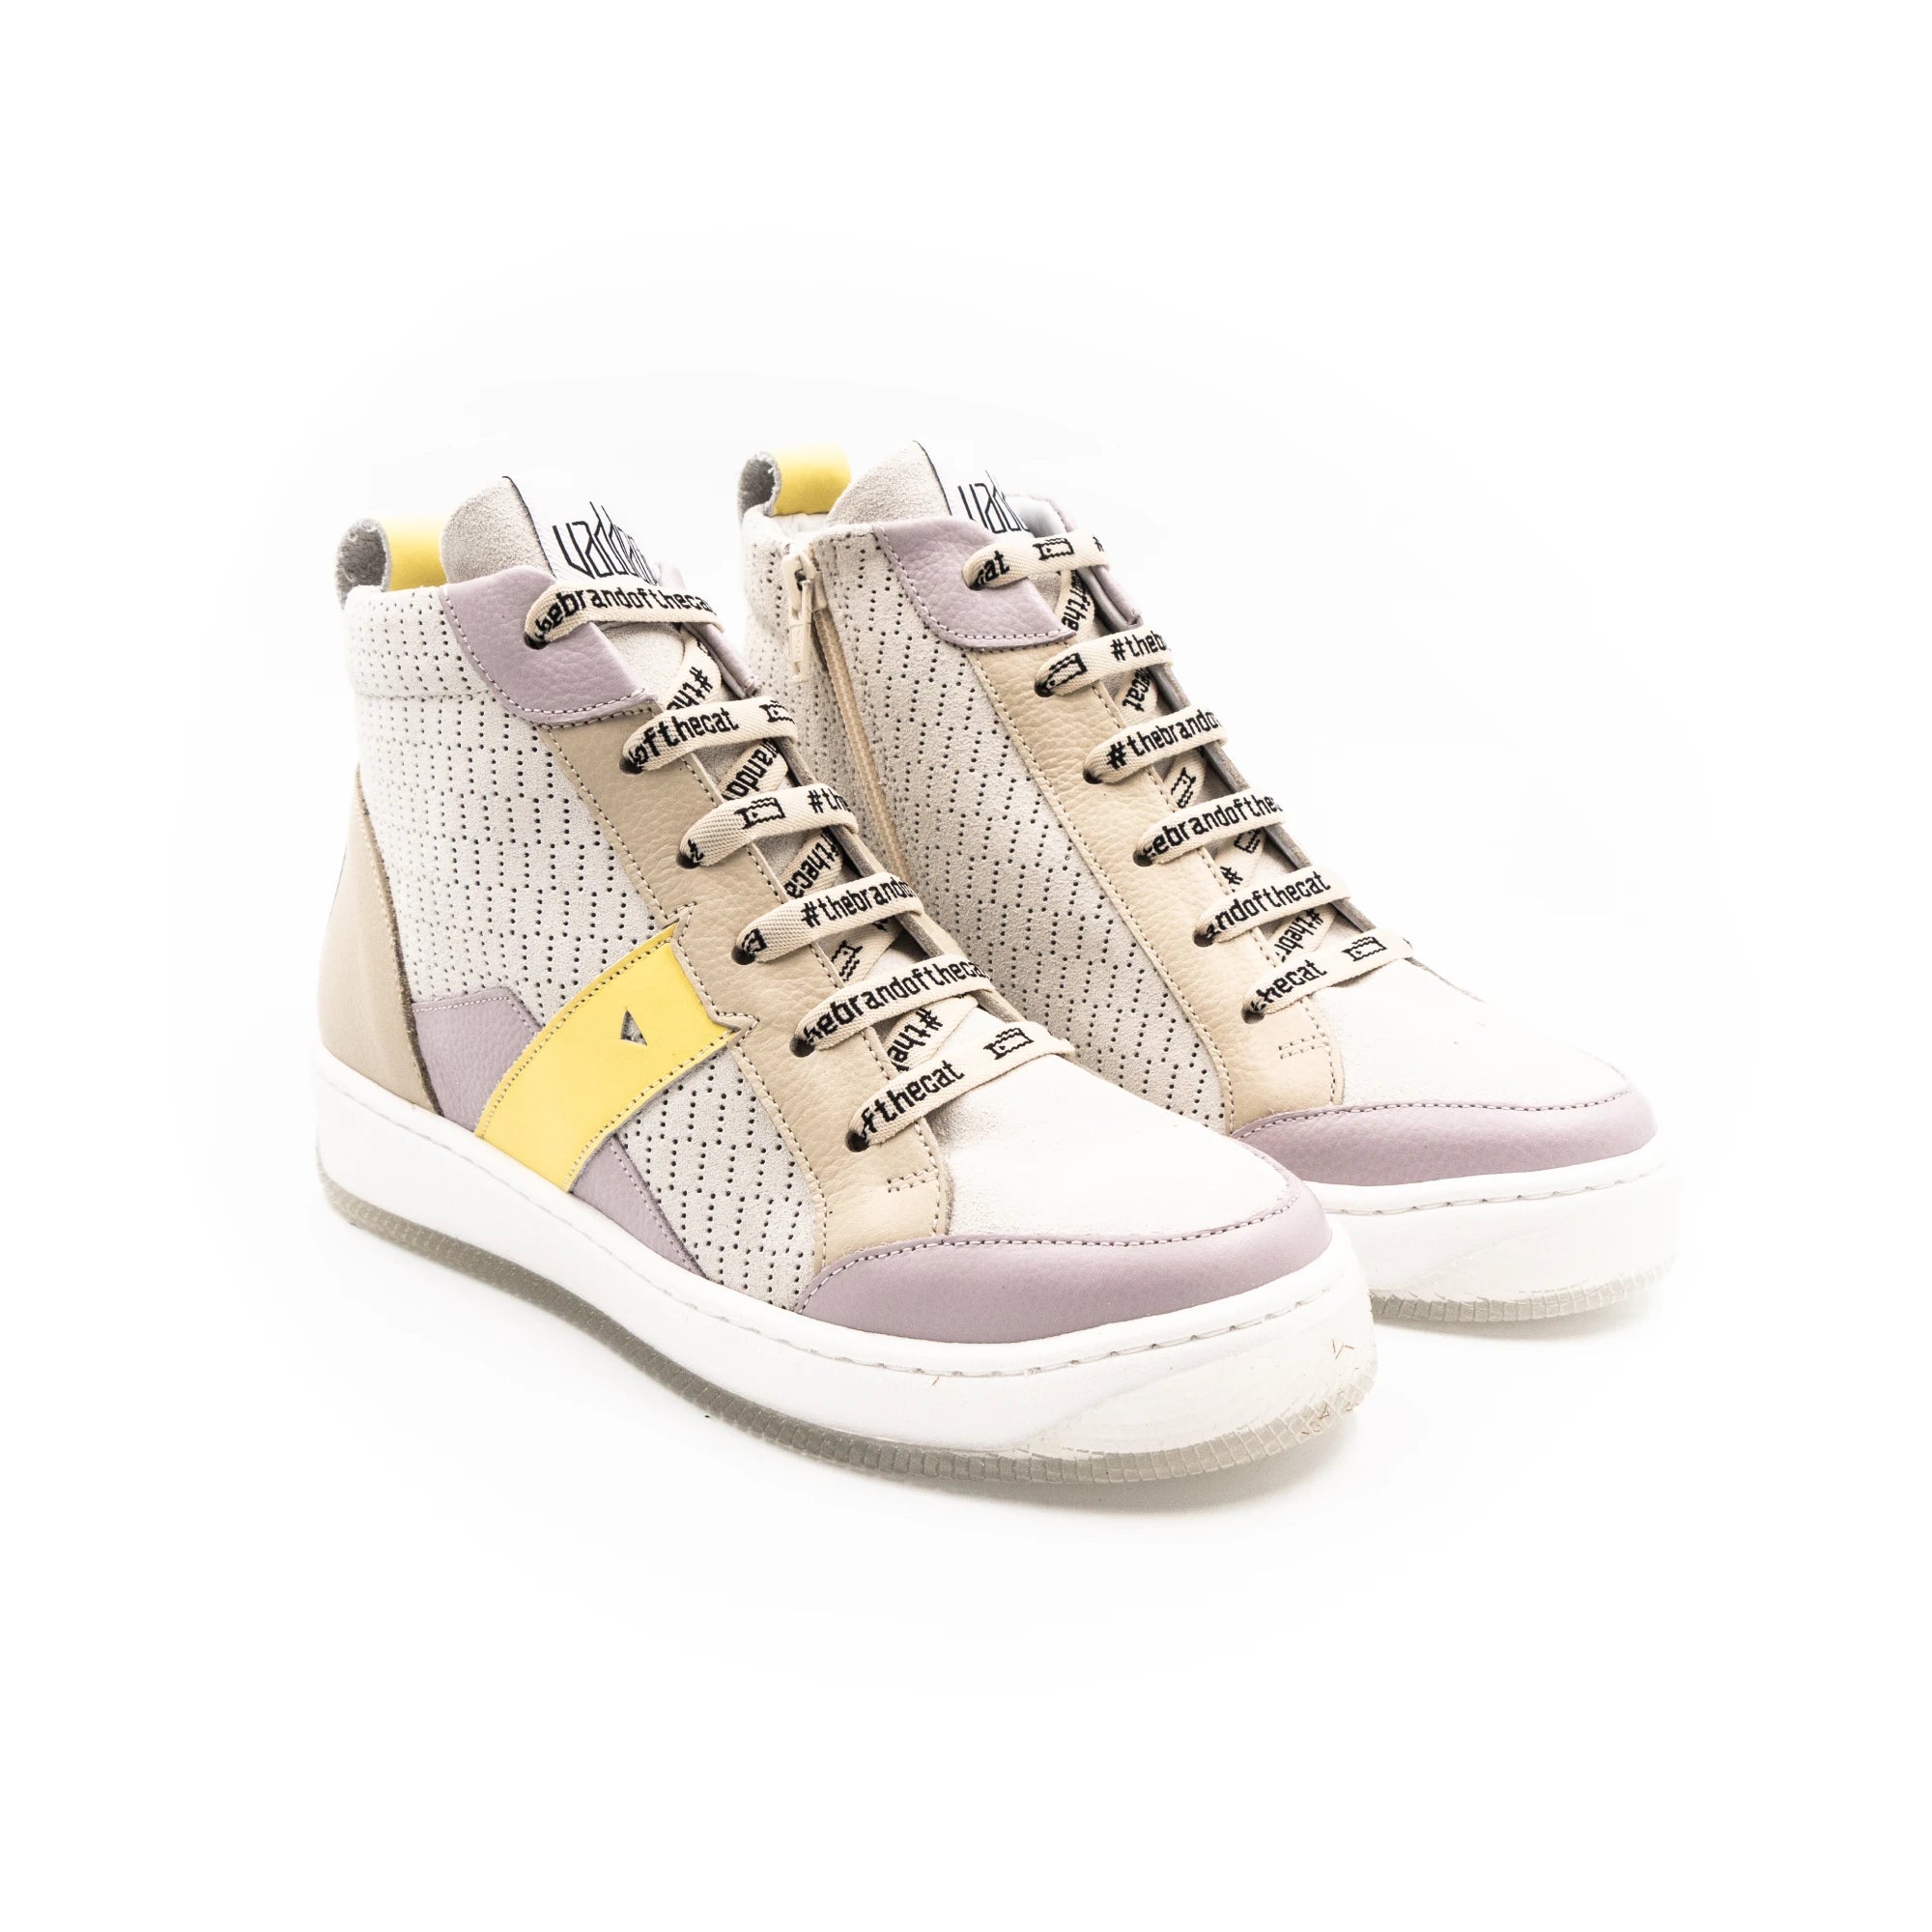 Cream-colored high-top sneakers.